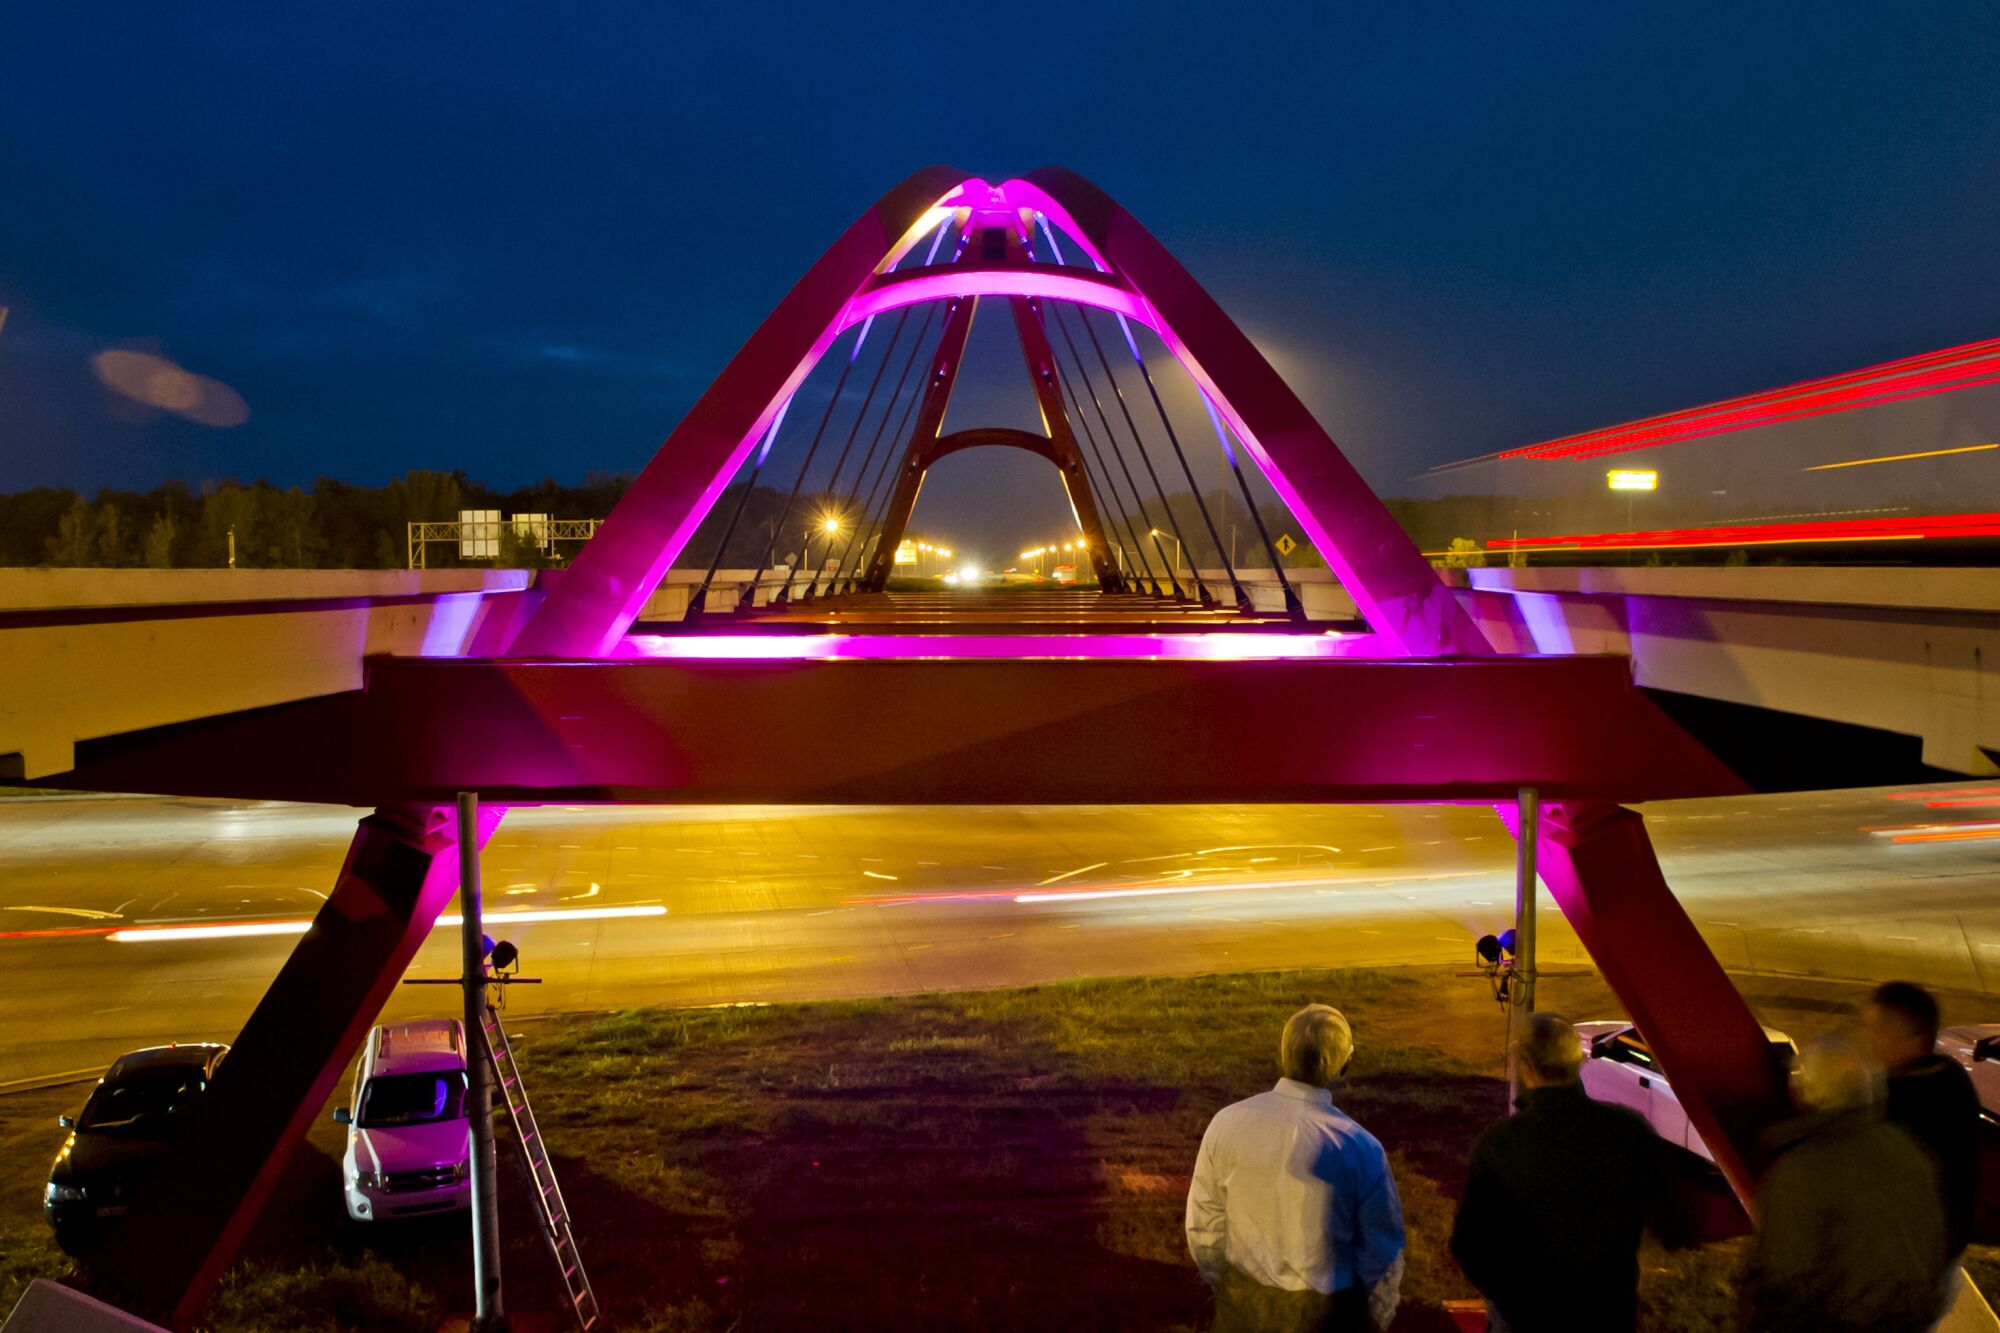 The arched red Front Door Bridge at night over the Interstate 65 and State Road 46 interchange